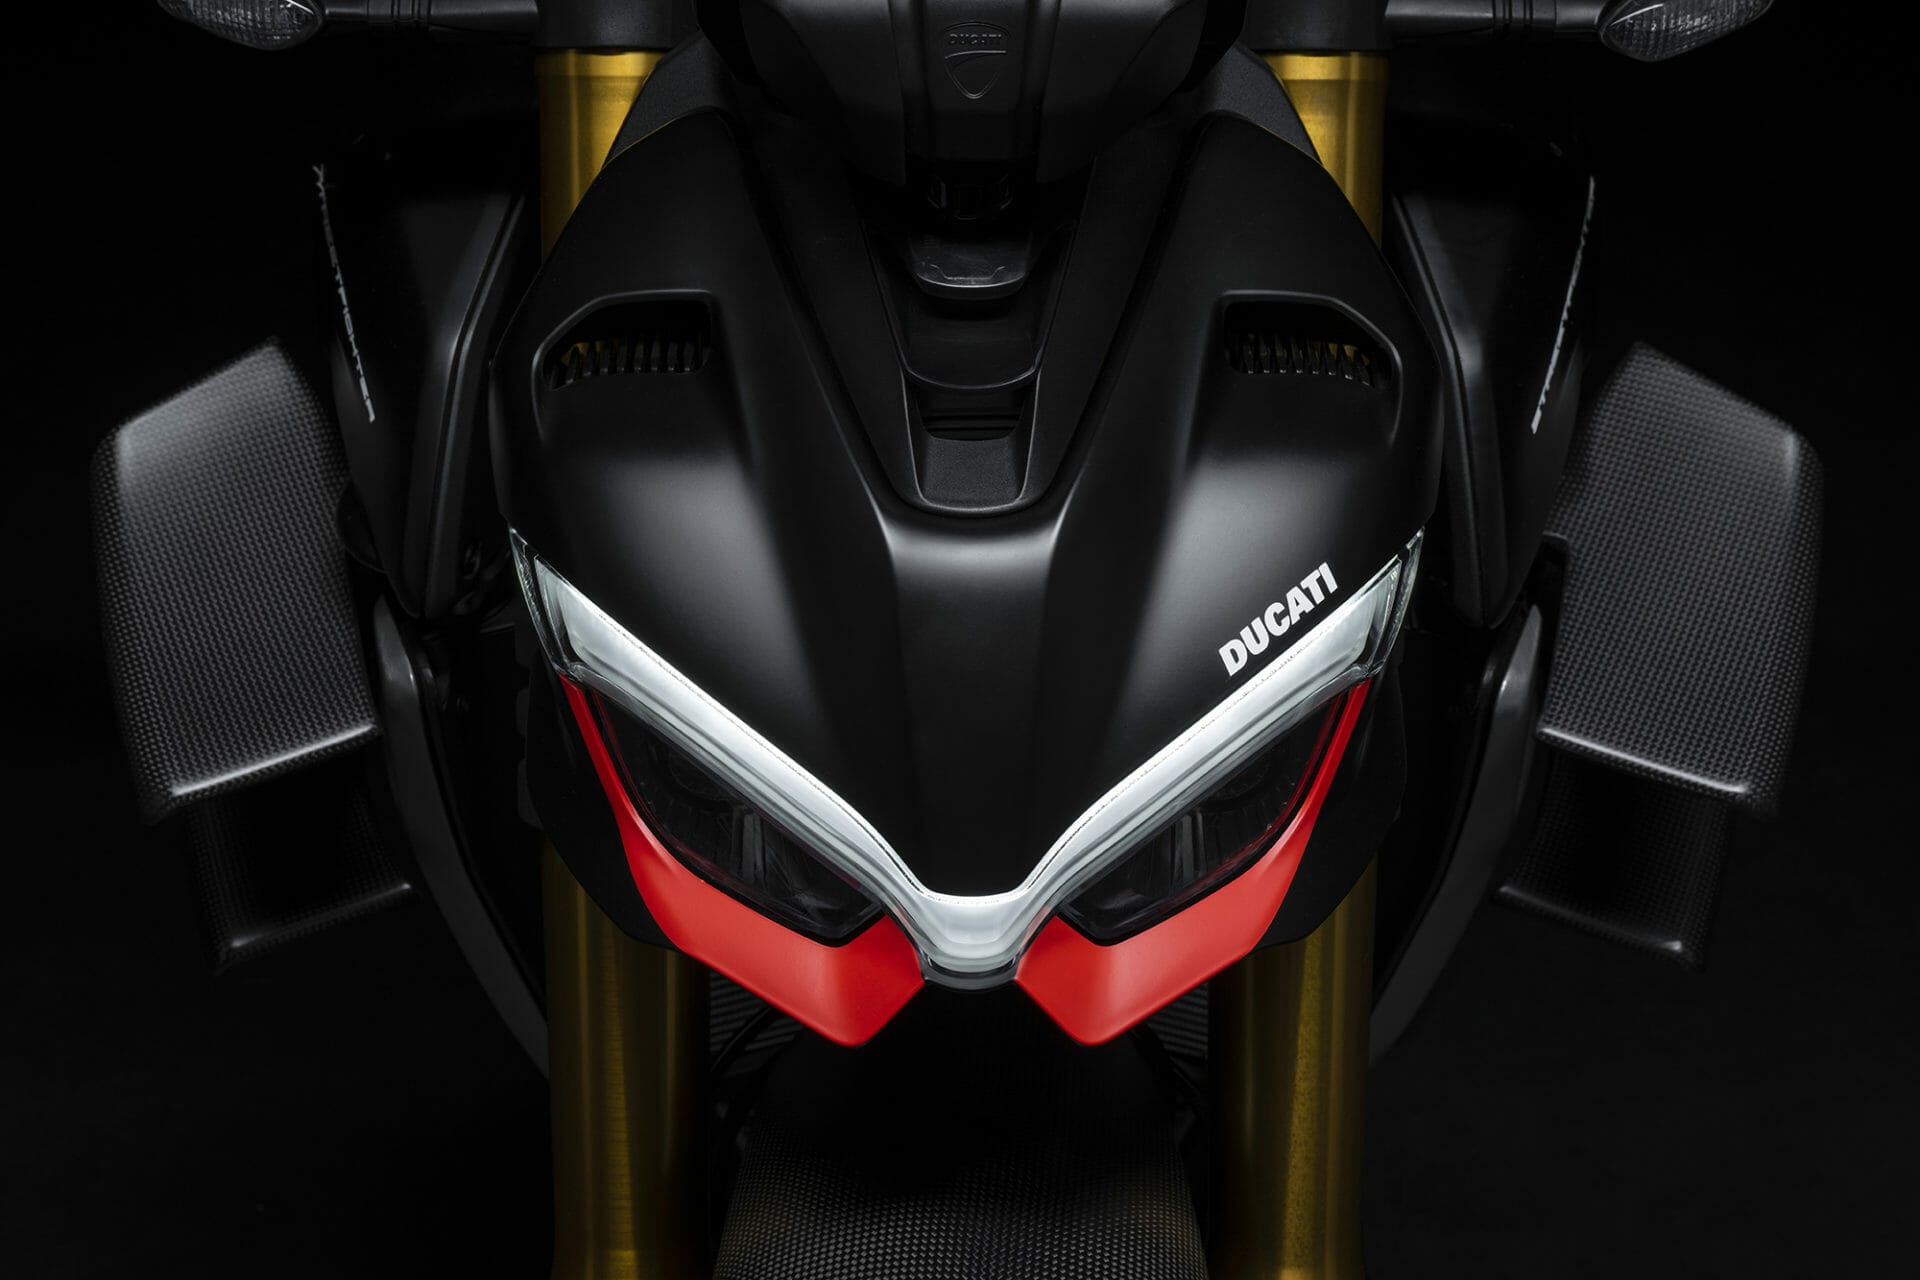 Ducati revises the Streetfighter family - MOTORCYCLES.NEWS